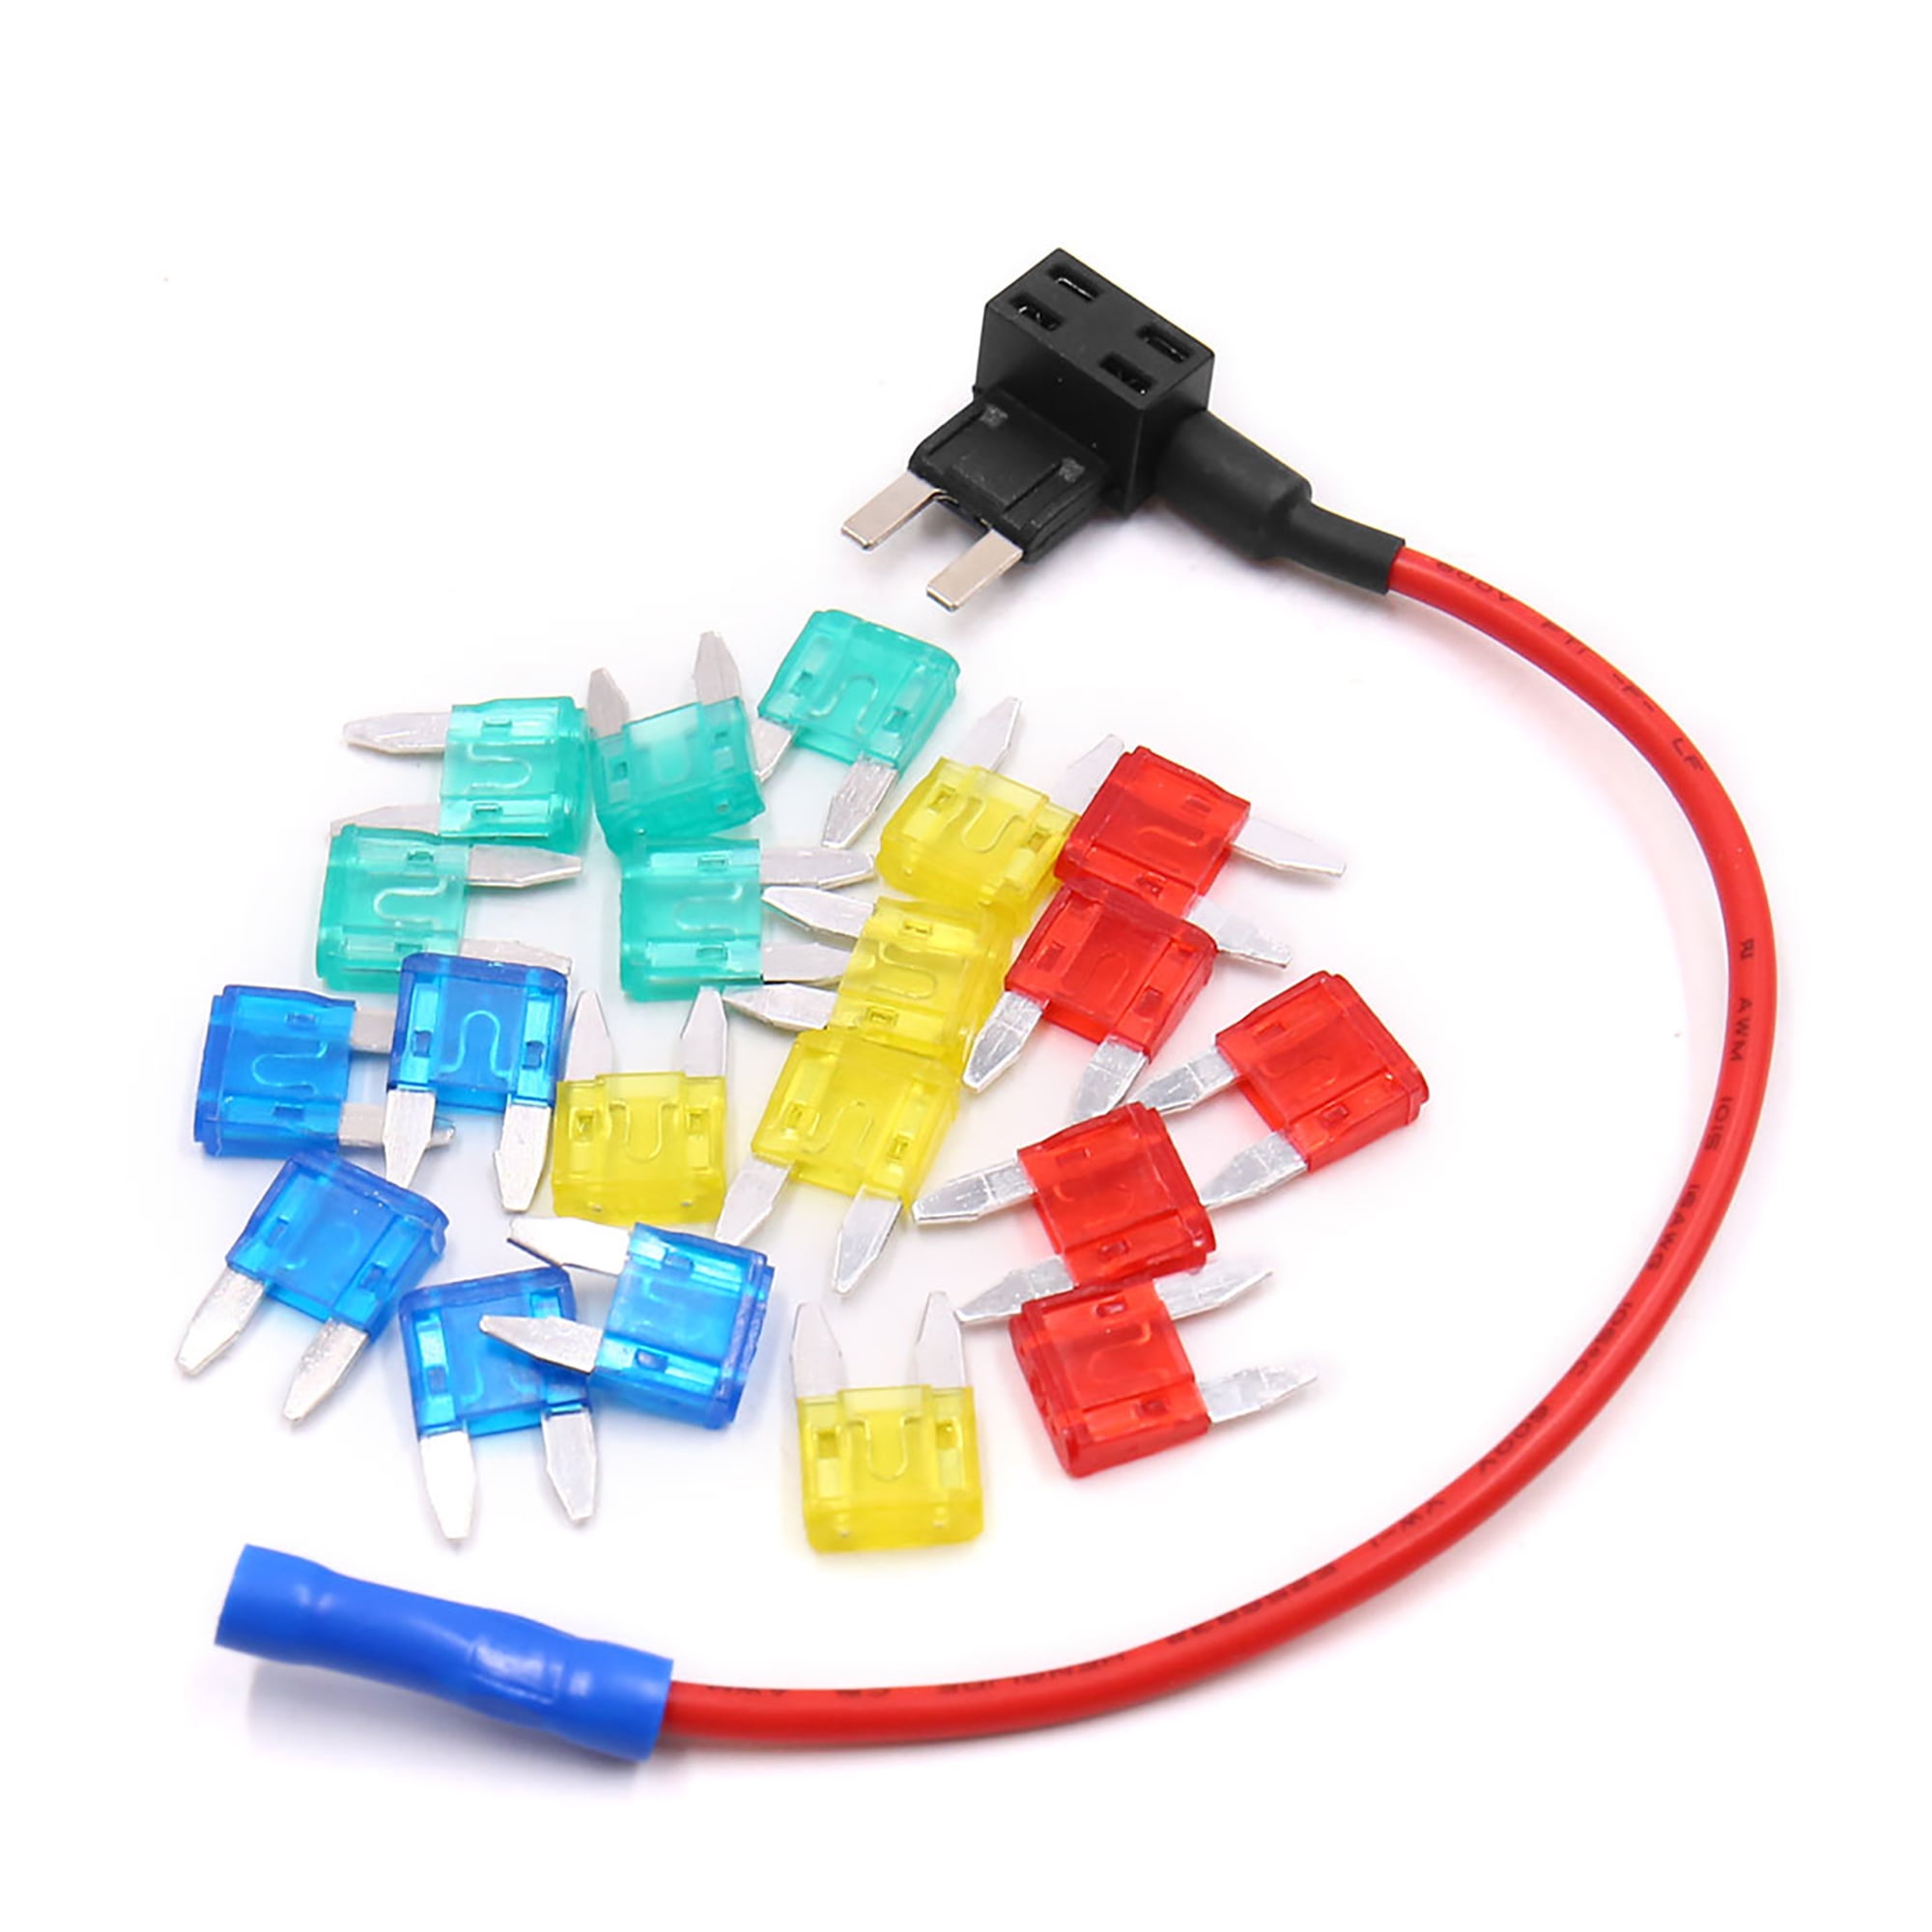 Fuse set NEW Car Add A Circuit Standard Blade Style ATM Mini Fuse Tap Holder 